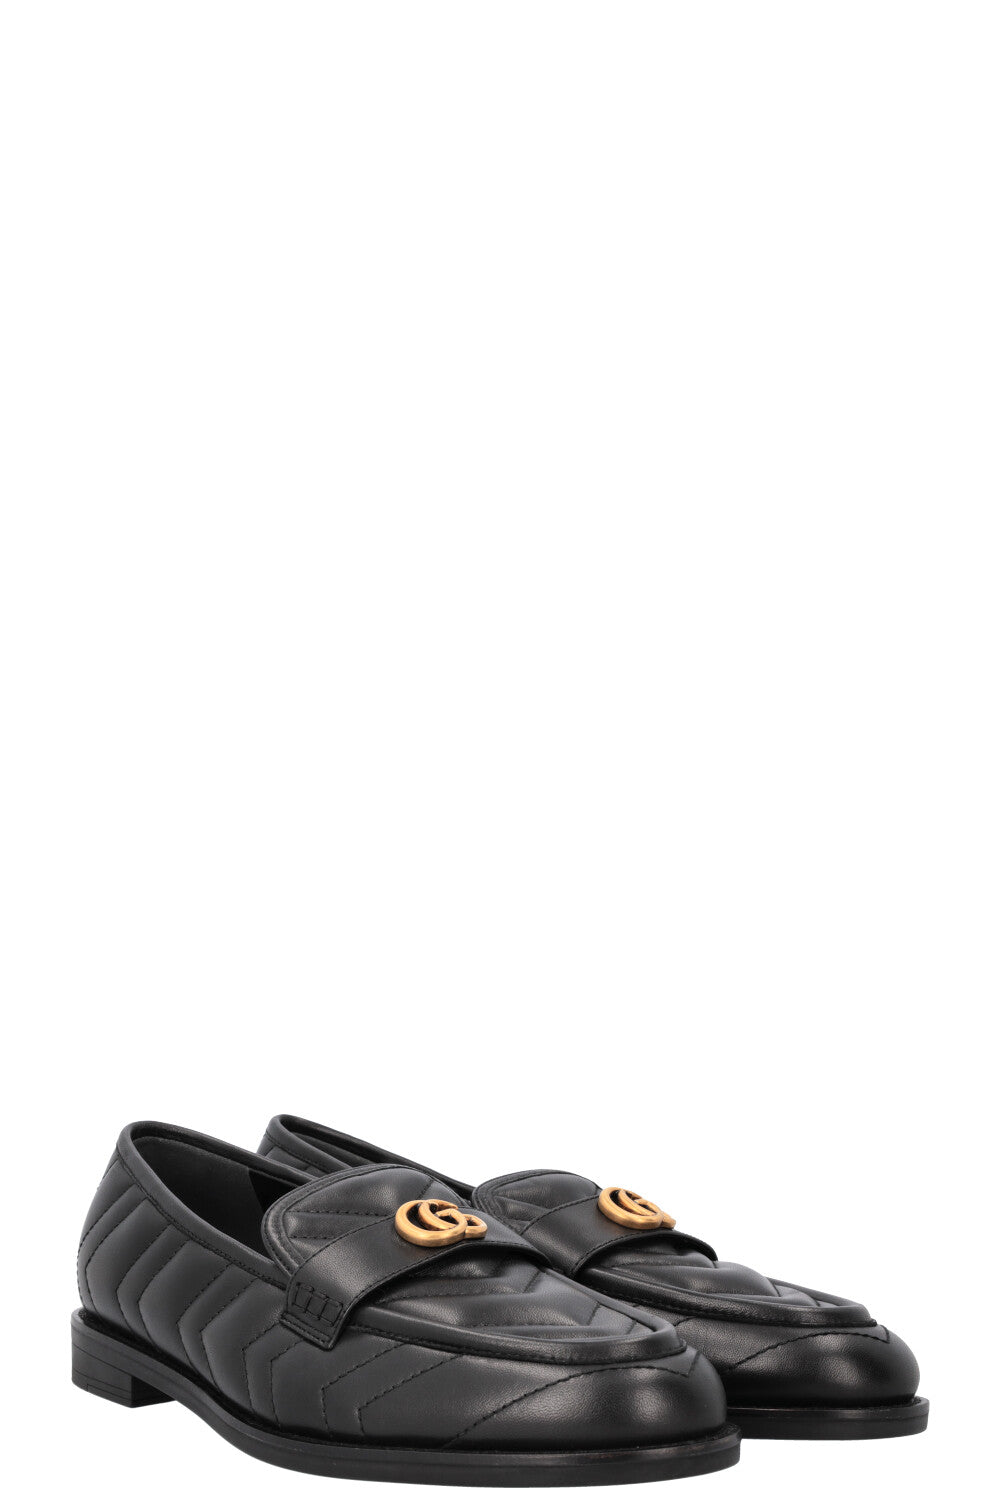 GUCCI Marmont Quilted Leather Loafers Black